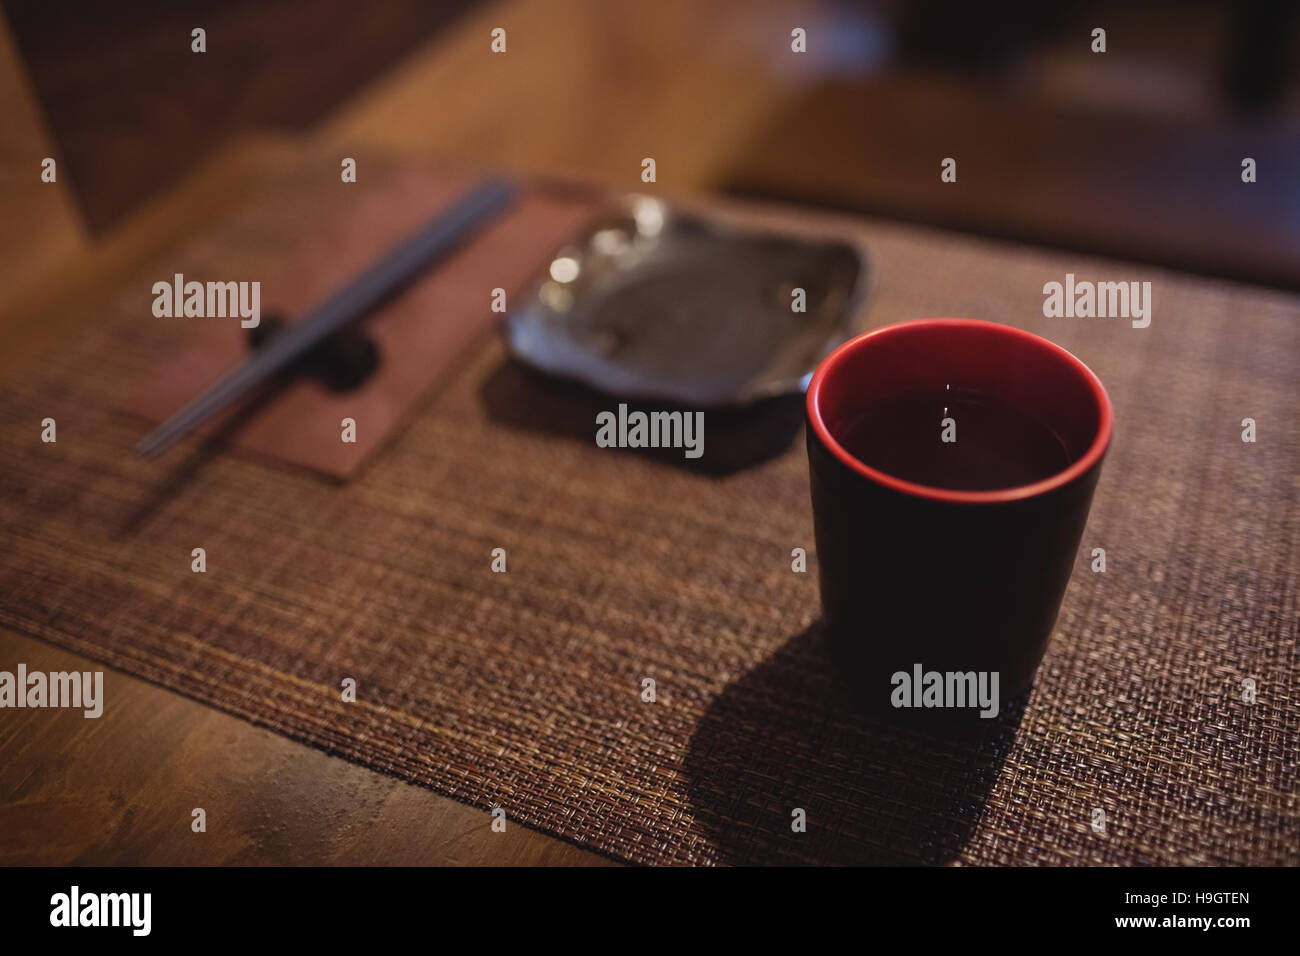 Cup of sake on dining table Stock Photo